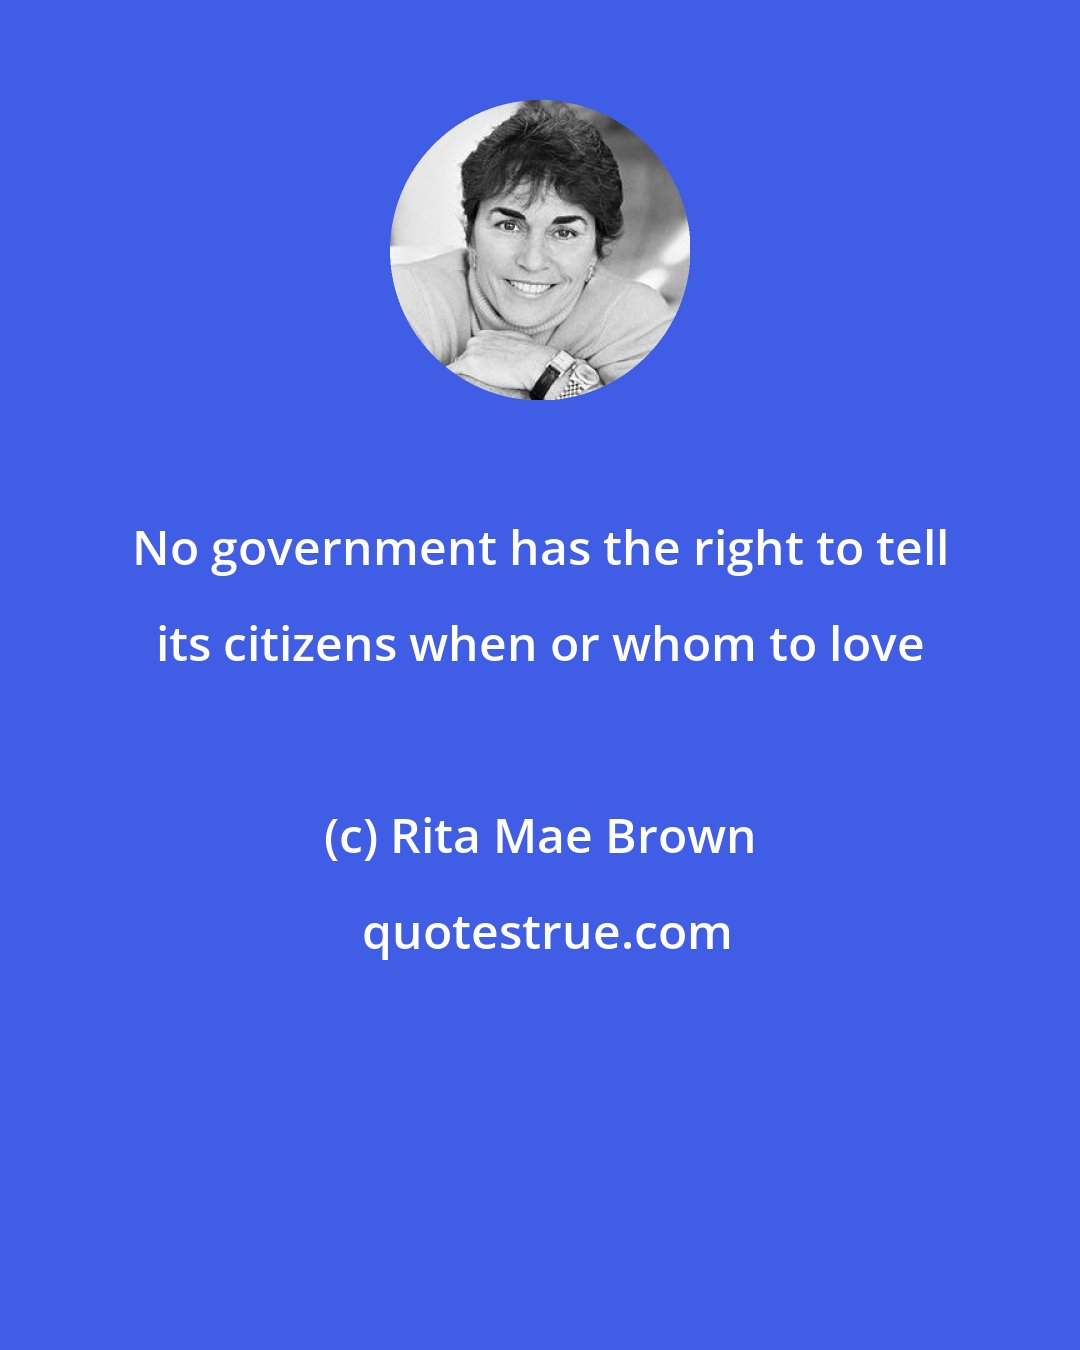 Rita Mae Brown: No government has the right to tell its citizens when or whom to love